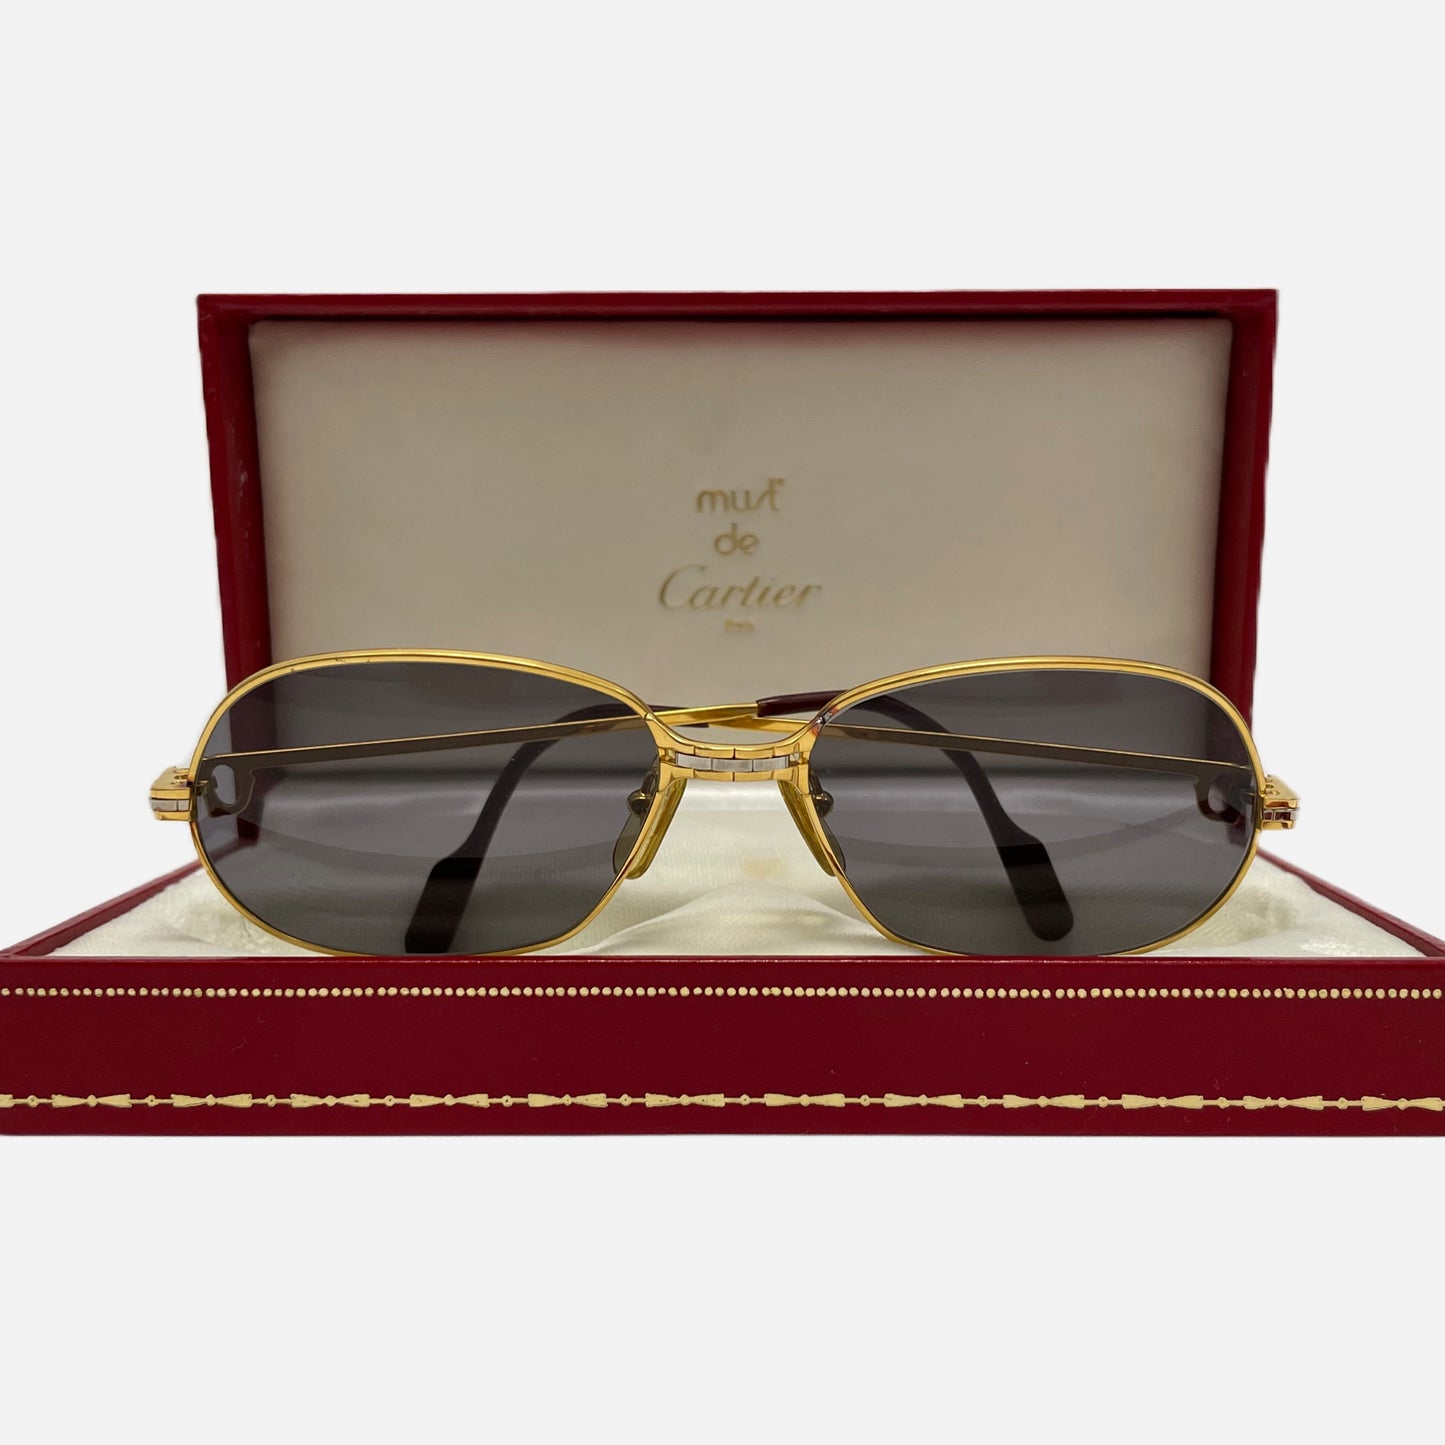 Vintage-Cartier-Panthere-Sonnenbrille-Sunglasses-22CT-Gold-Plated-the-seekers-cartie-case-box